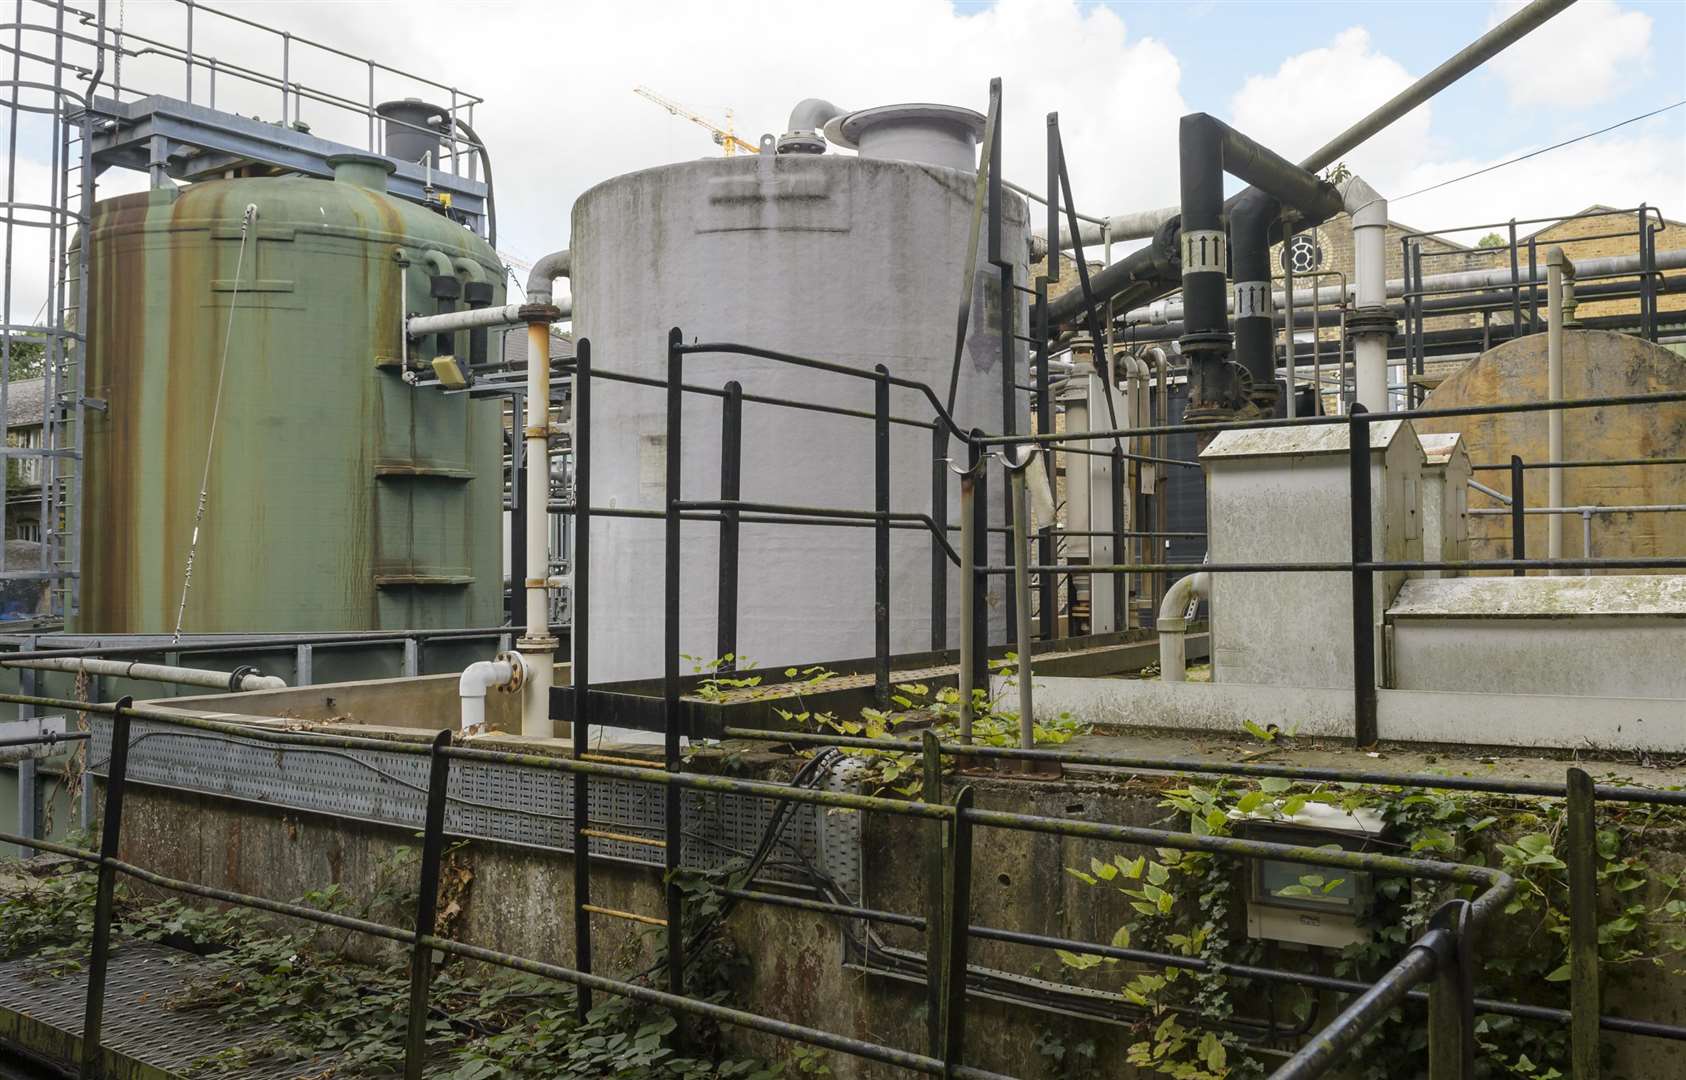 Chemical storage tanks adjacent to the Pulp Prep building